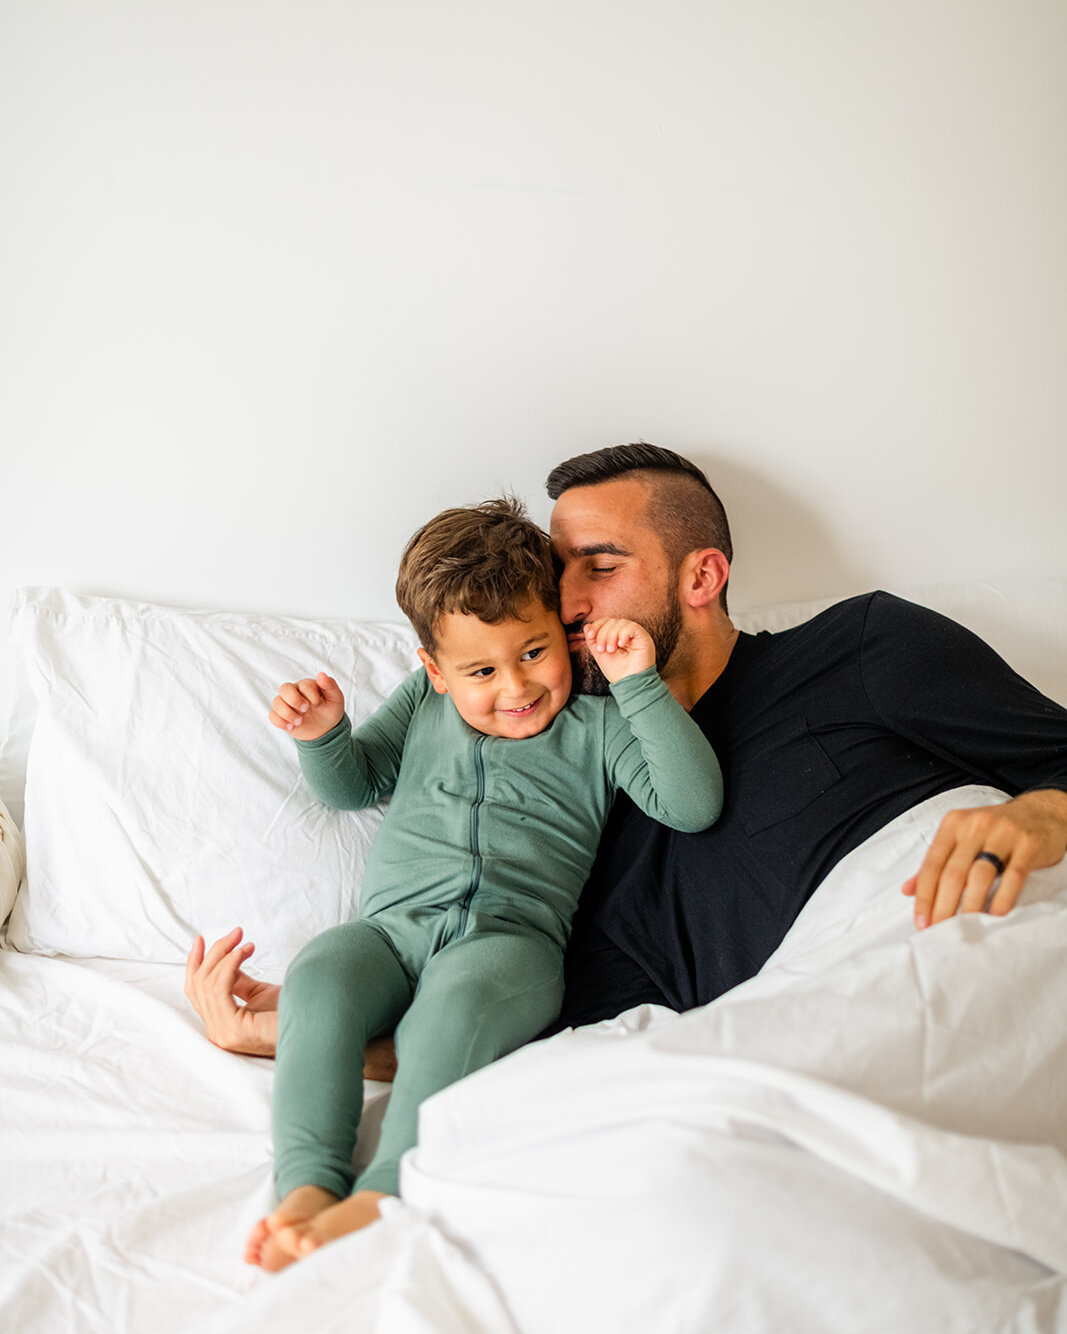 Starting with any sleep training method can feel like a LOT. Especially when your child is used to you responding how you always do...​​​​​​​​
​​​​​​​​
This is why including dad, your partner, or even a close family friend or relative can be helpful 